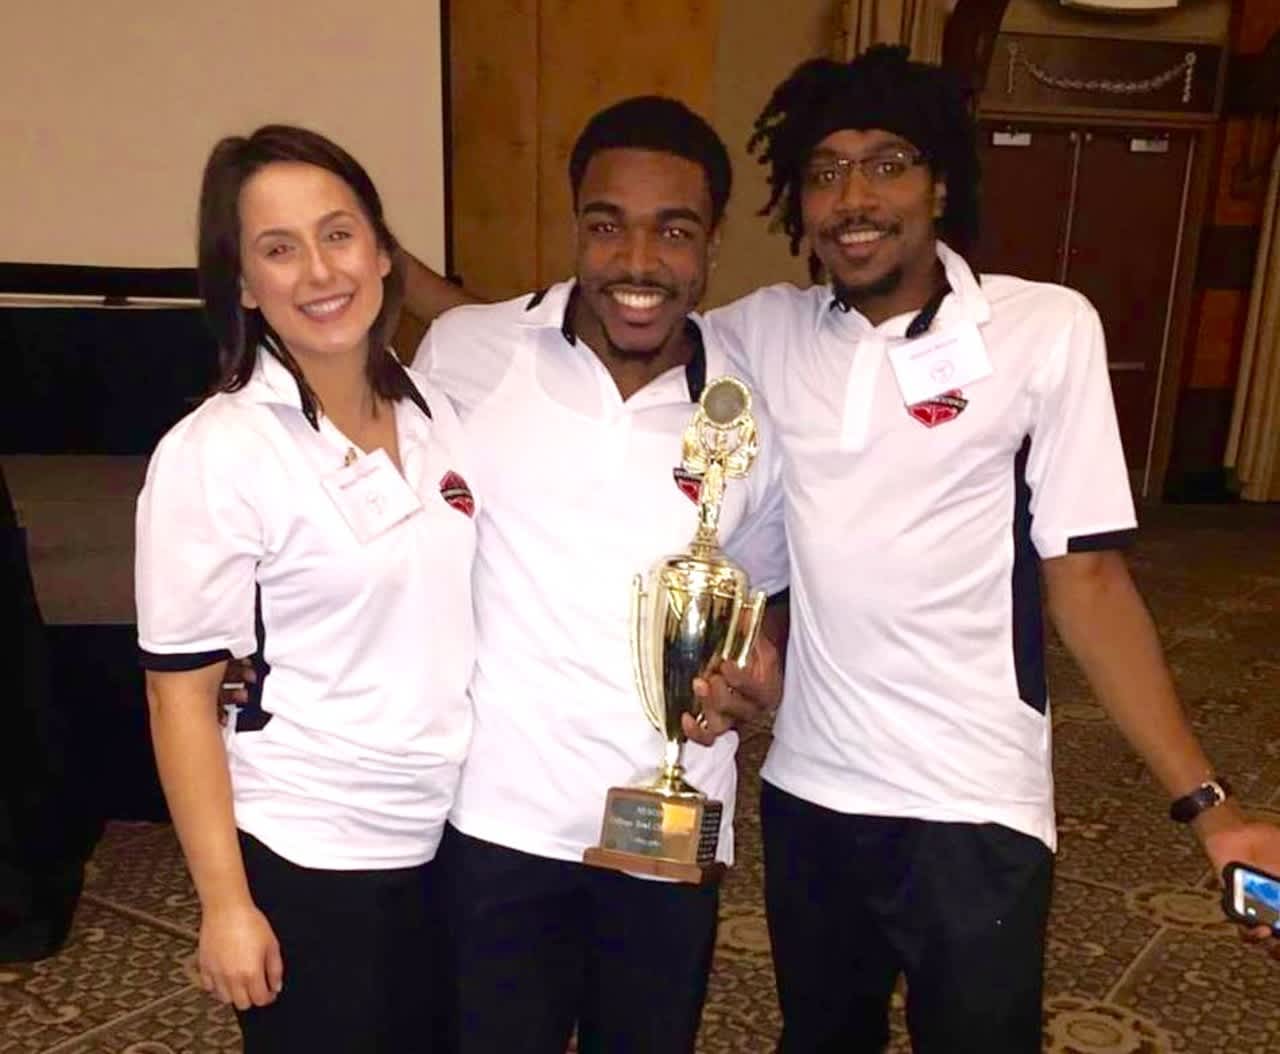 NCC students Melissa D’Agostino, Andre Aiken and Antoine Steward recently won the American College of Sports Medicine’s North East Regional College Bowl Competition. They will compete in the national college bowl in May.